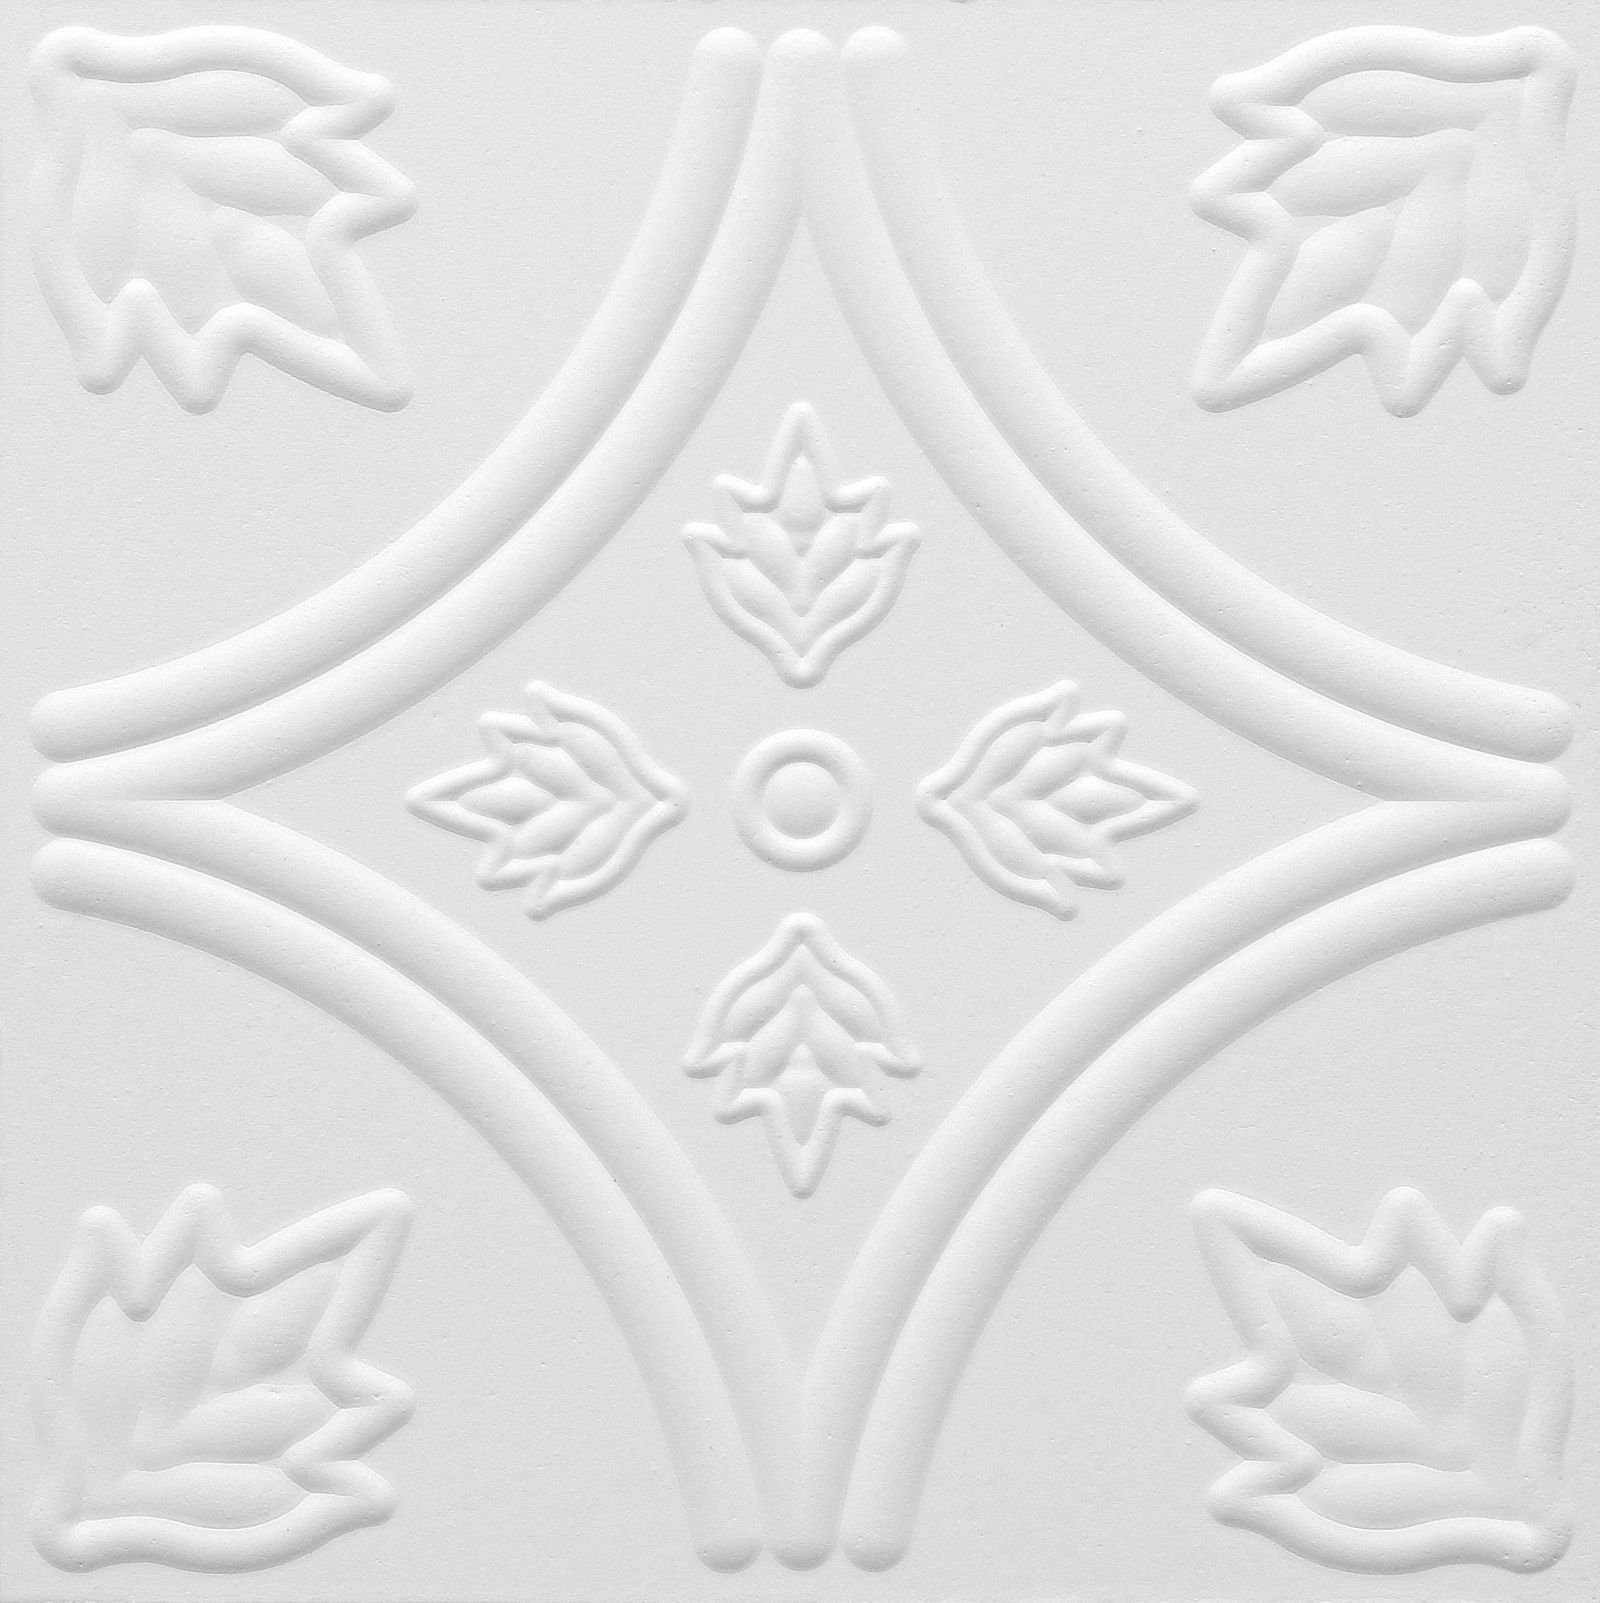 Armstrong Ceiling Tile Patterns Armstrong Ceiling Tile Patterns update your ceiling with armstrong ceiling tiles 1600 X 1603